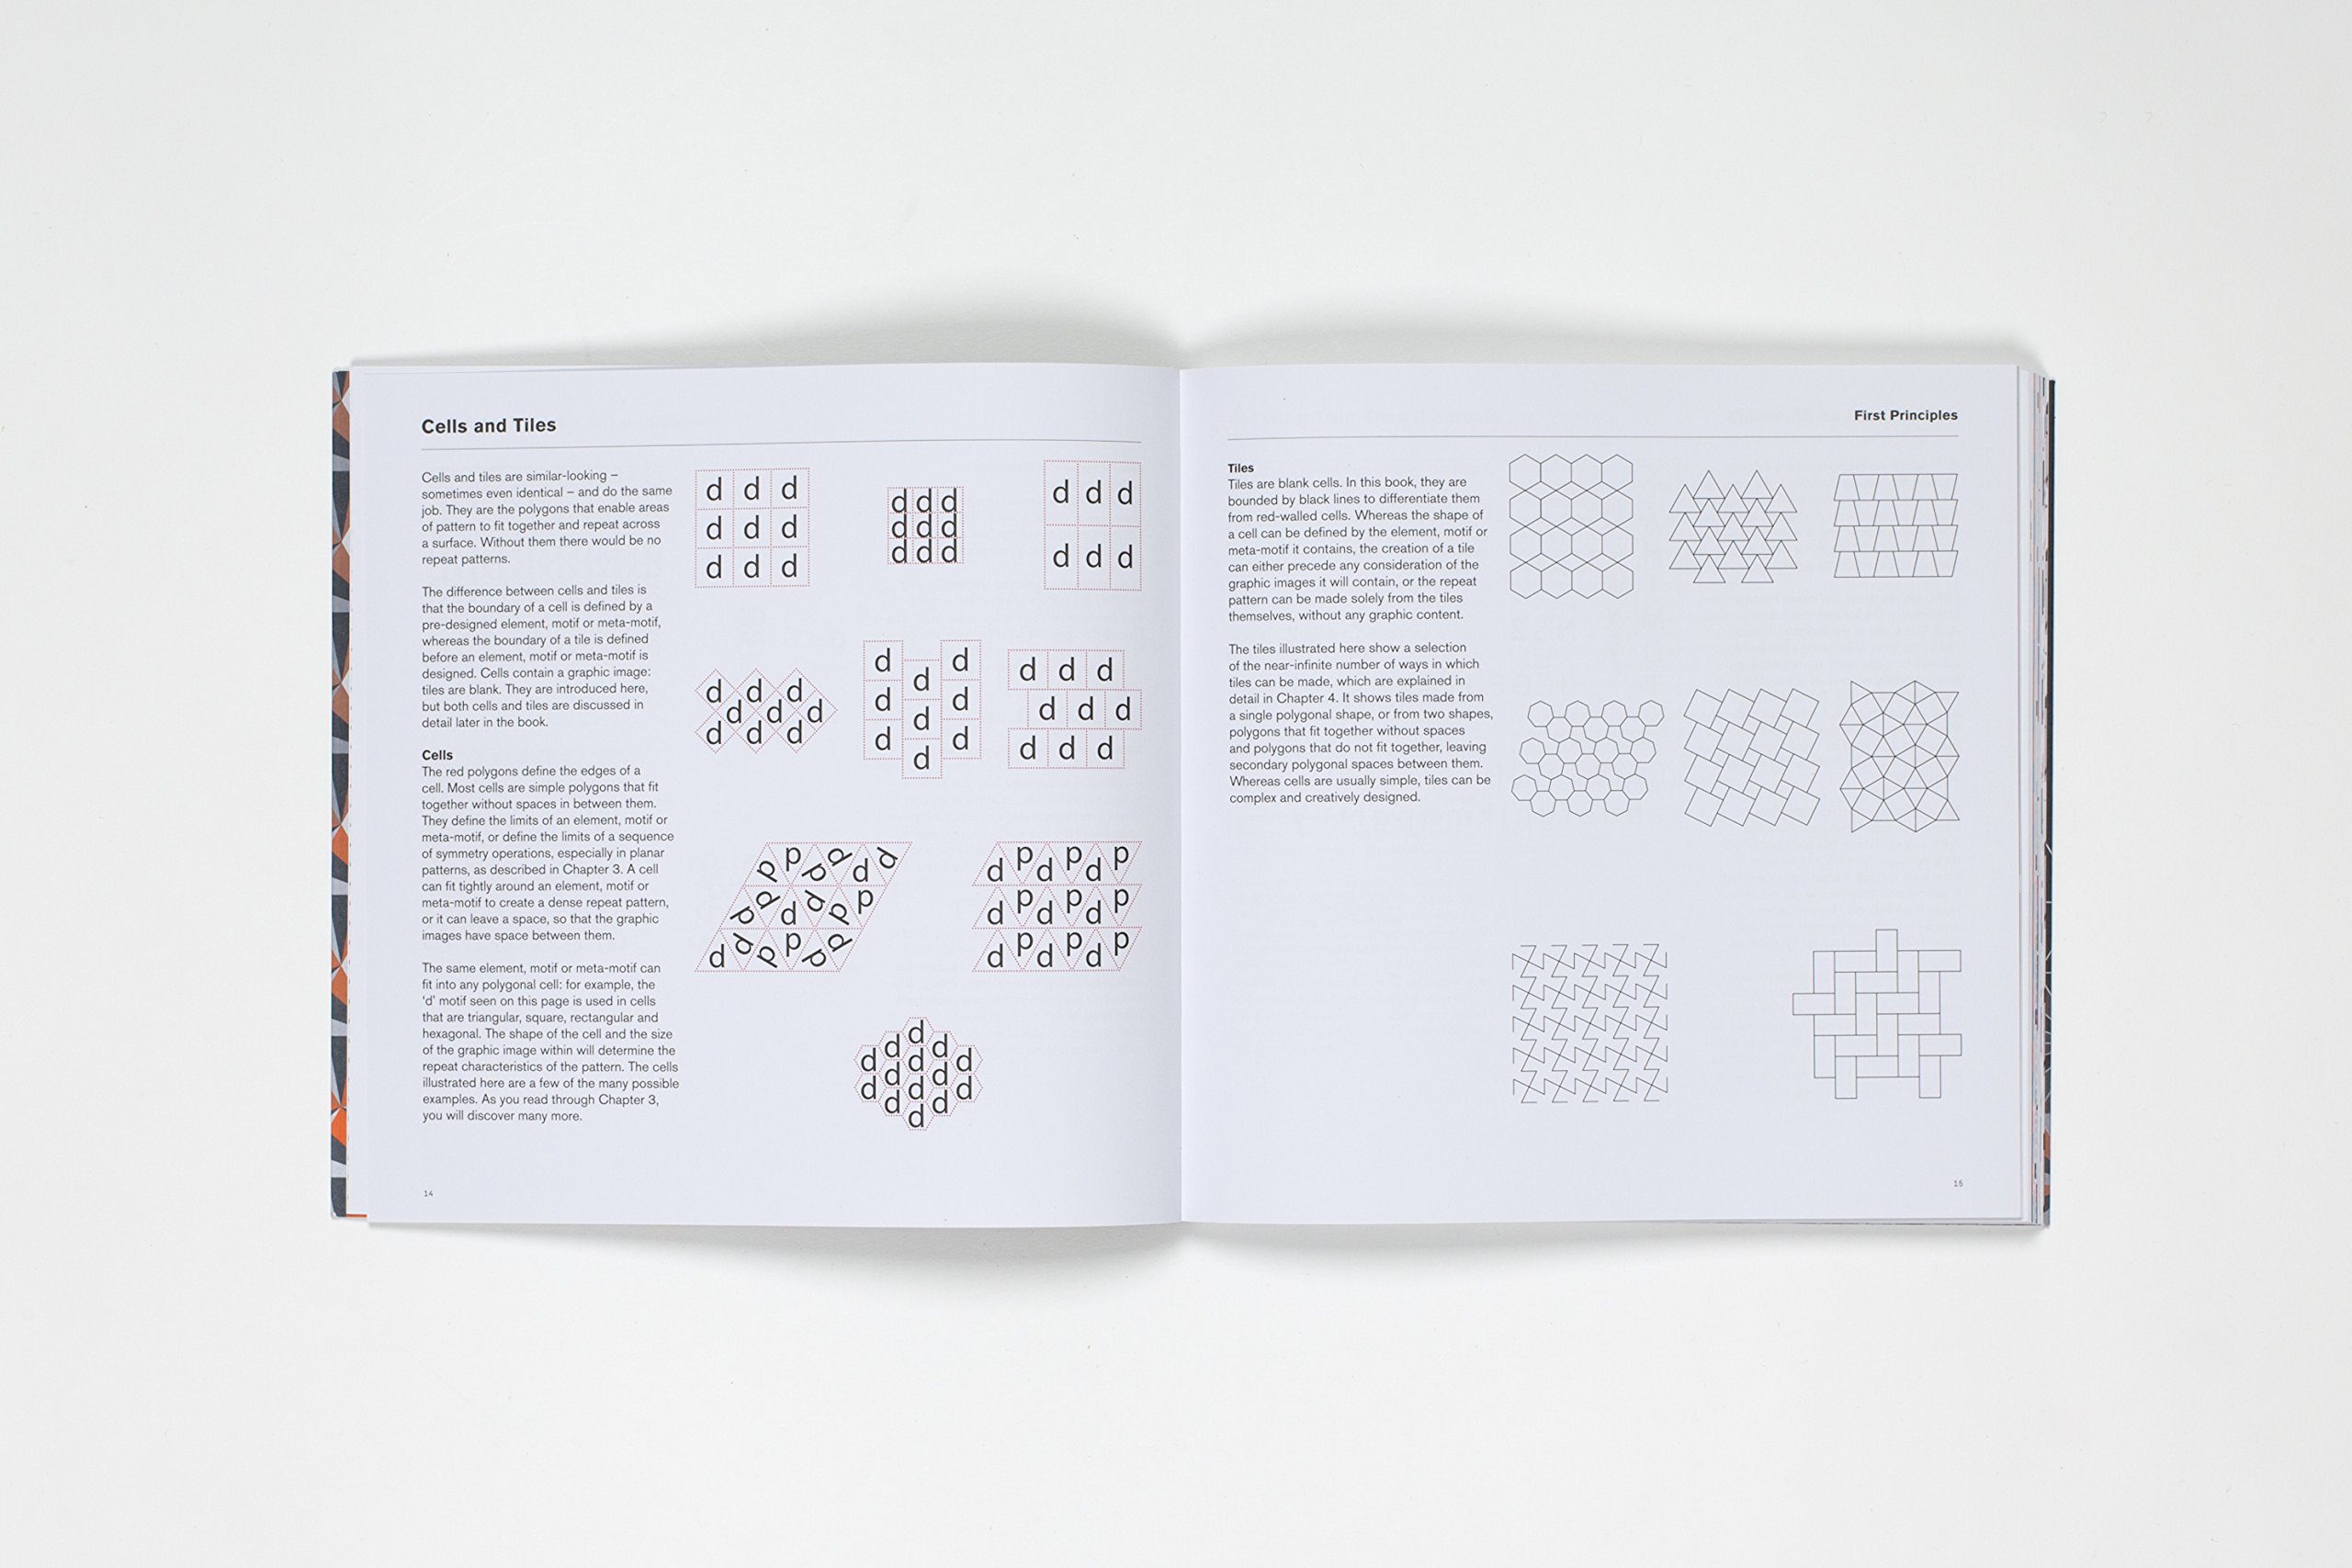 How-to-Make-Repeat-Patterns-A-Guide-for-Designers-Architects-and-Artists